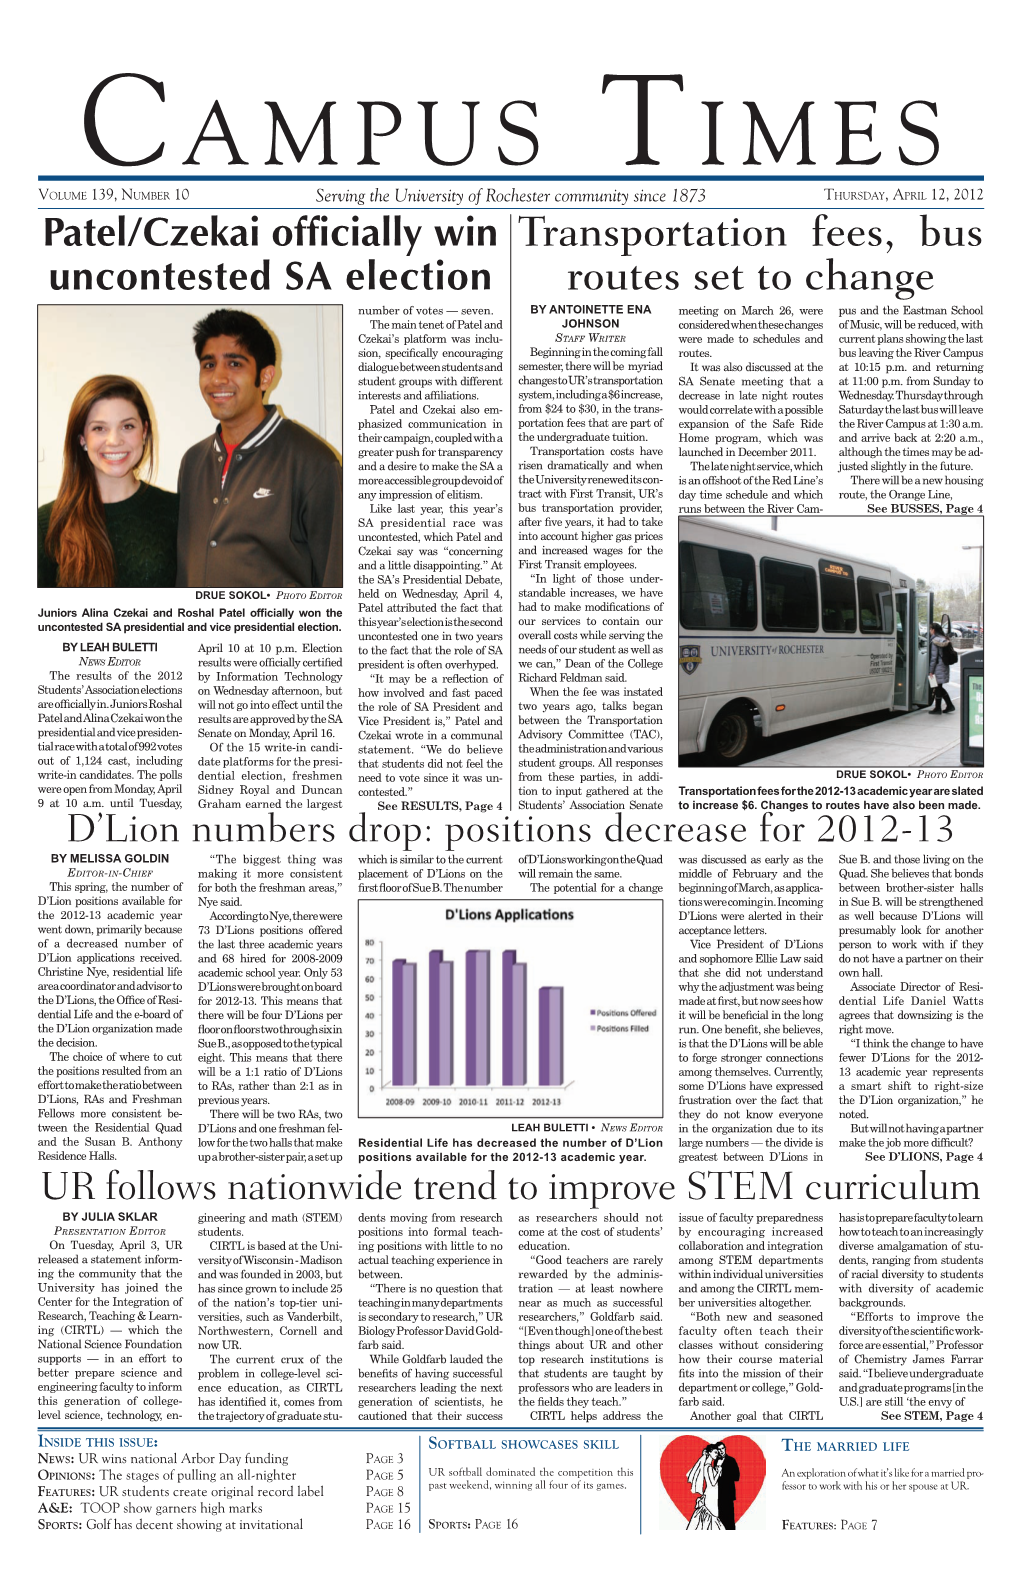 Apr 12, 2012 Issue 10